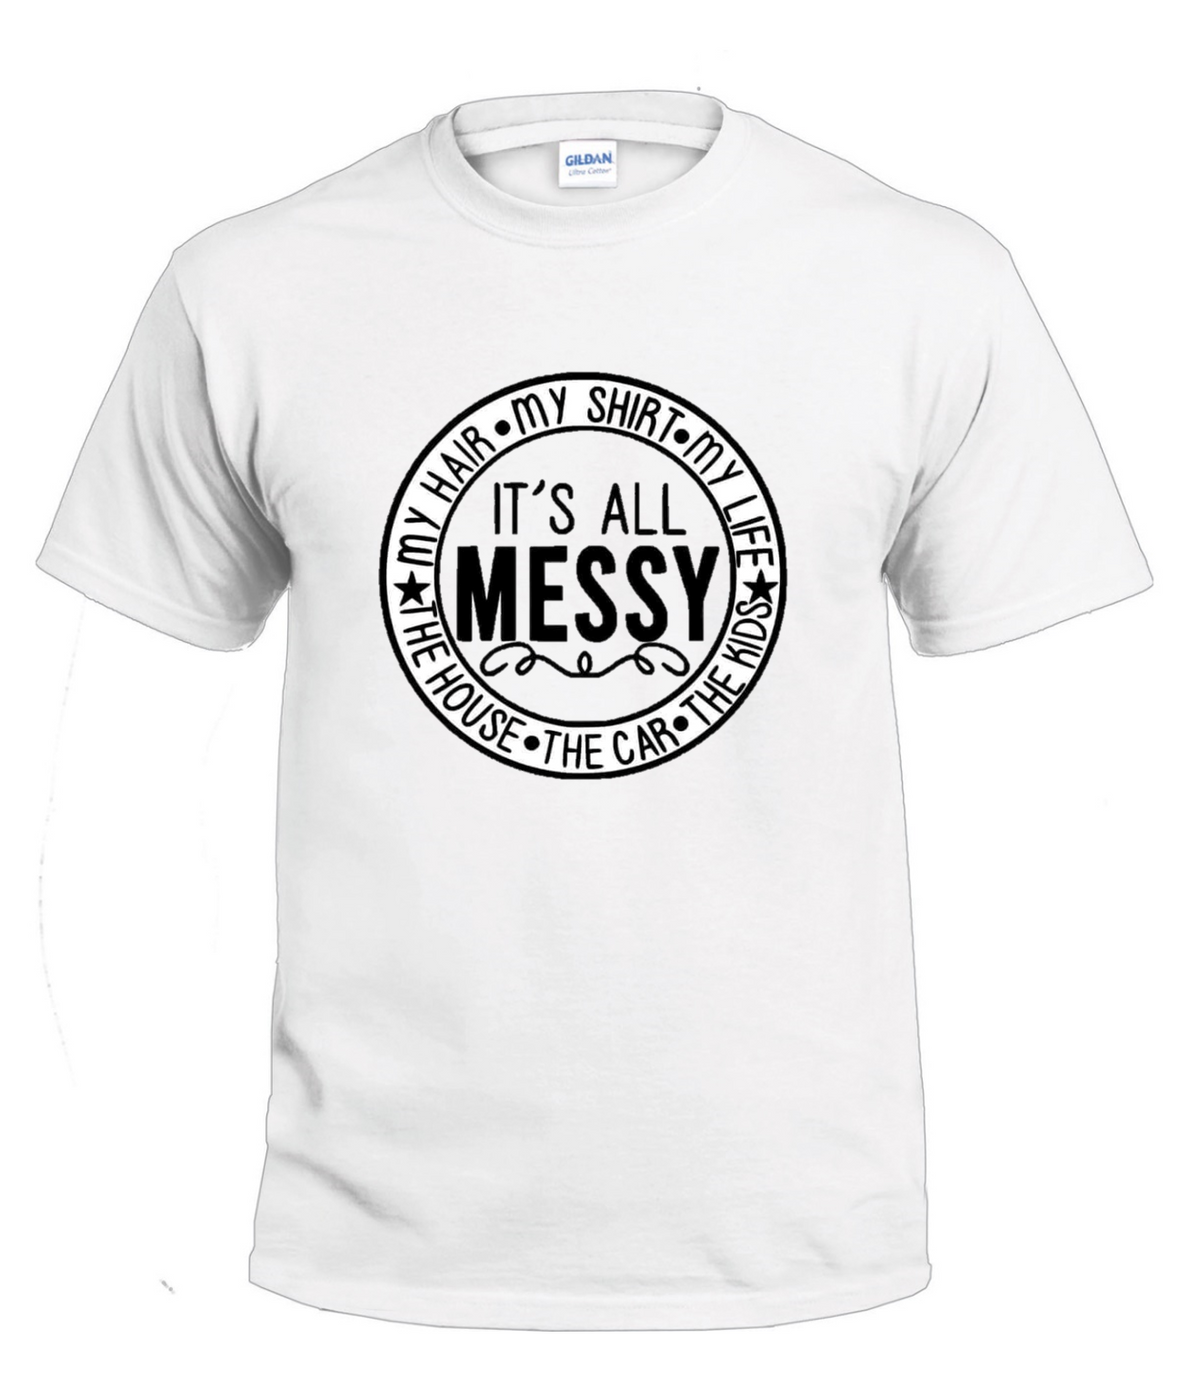 It's All Messy t-shirt